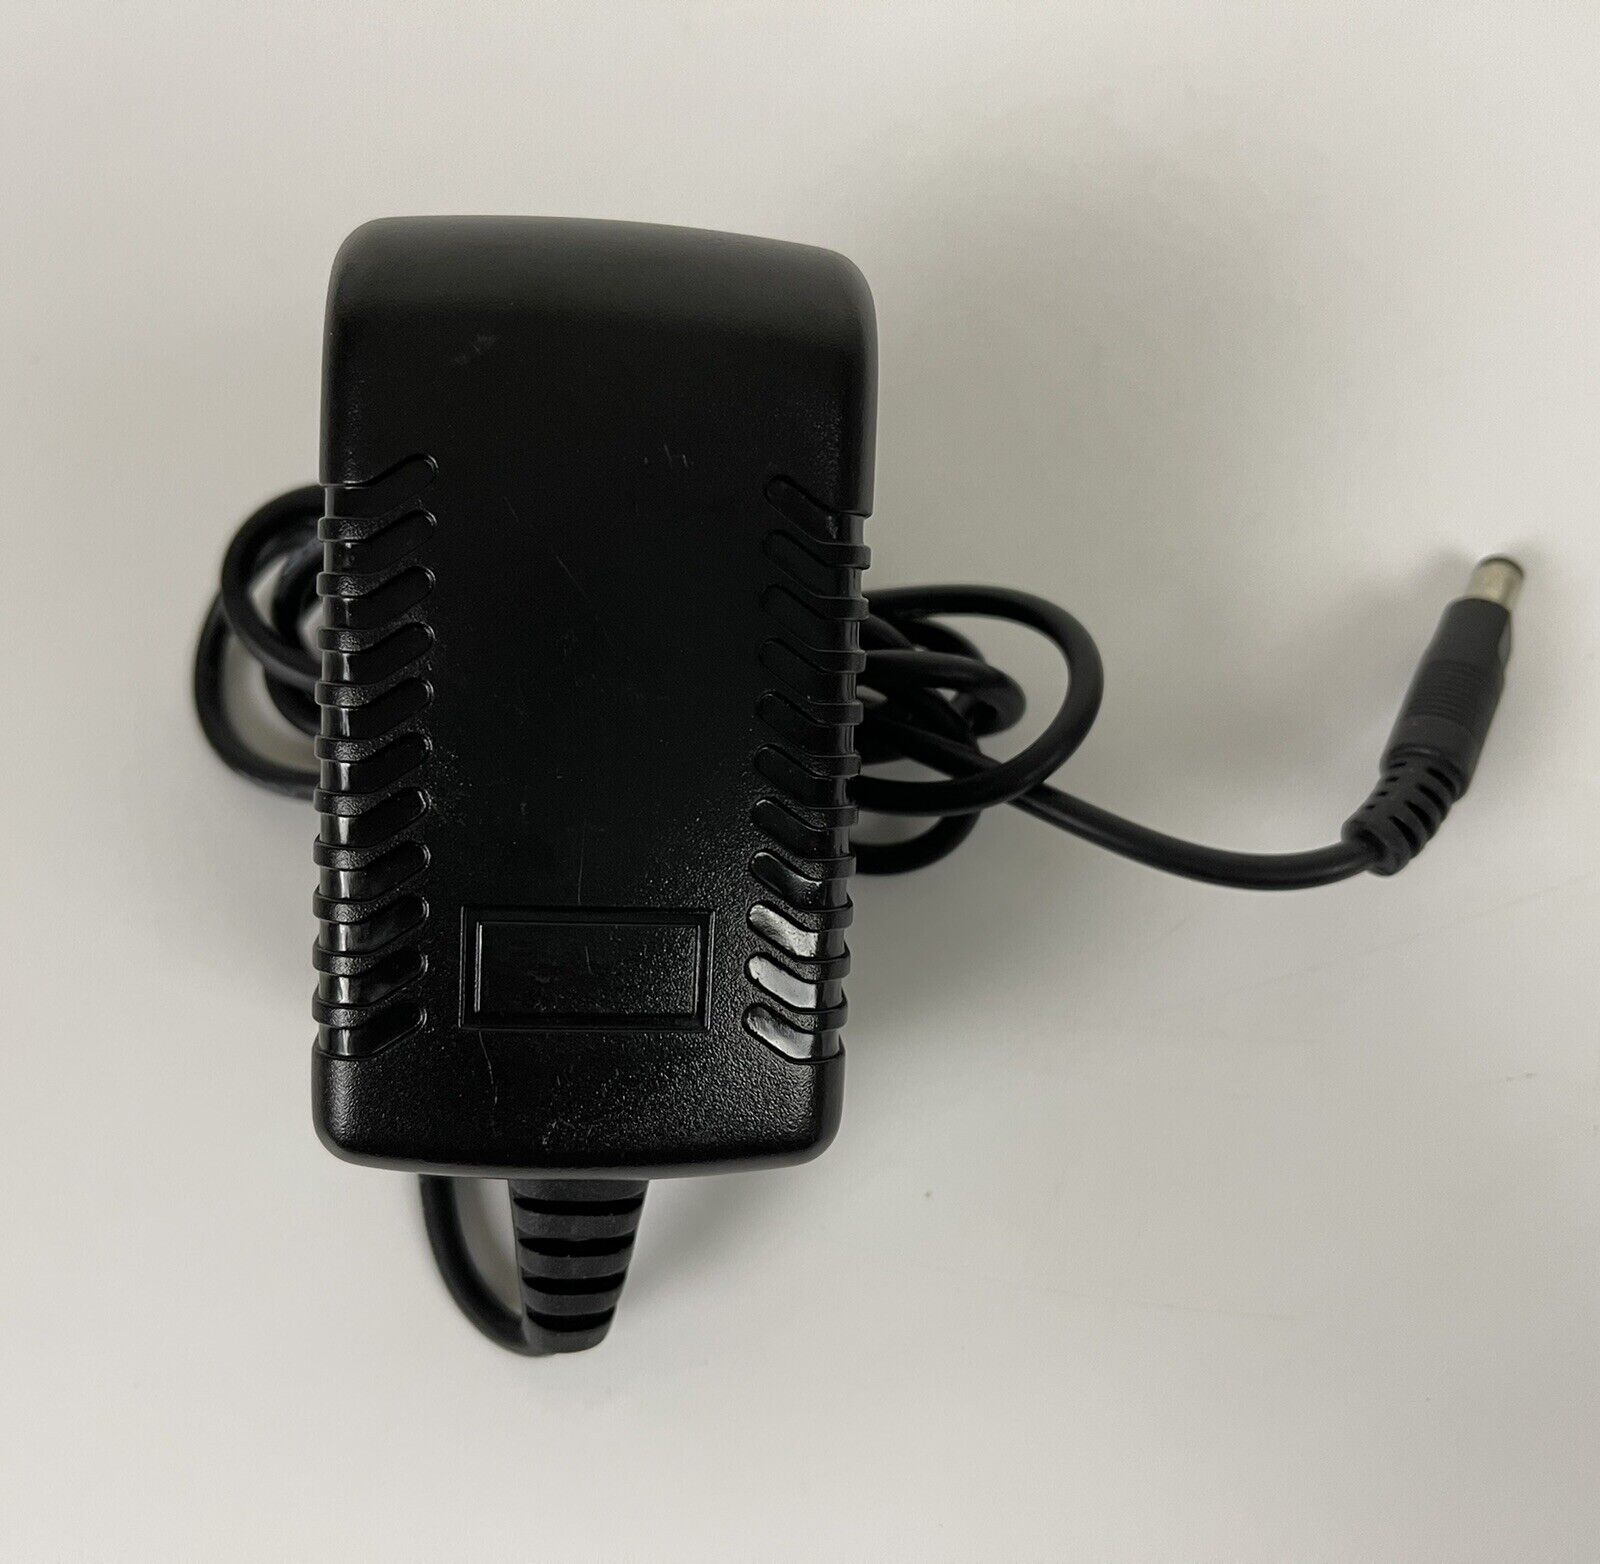 AC Adapter for Vector VEC1376RL LAMP Power Supply Cord Cable PS Wall Charger This product is good for the following Mod